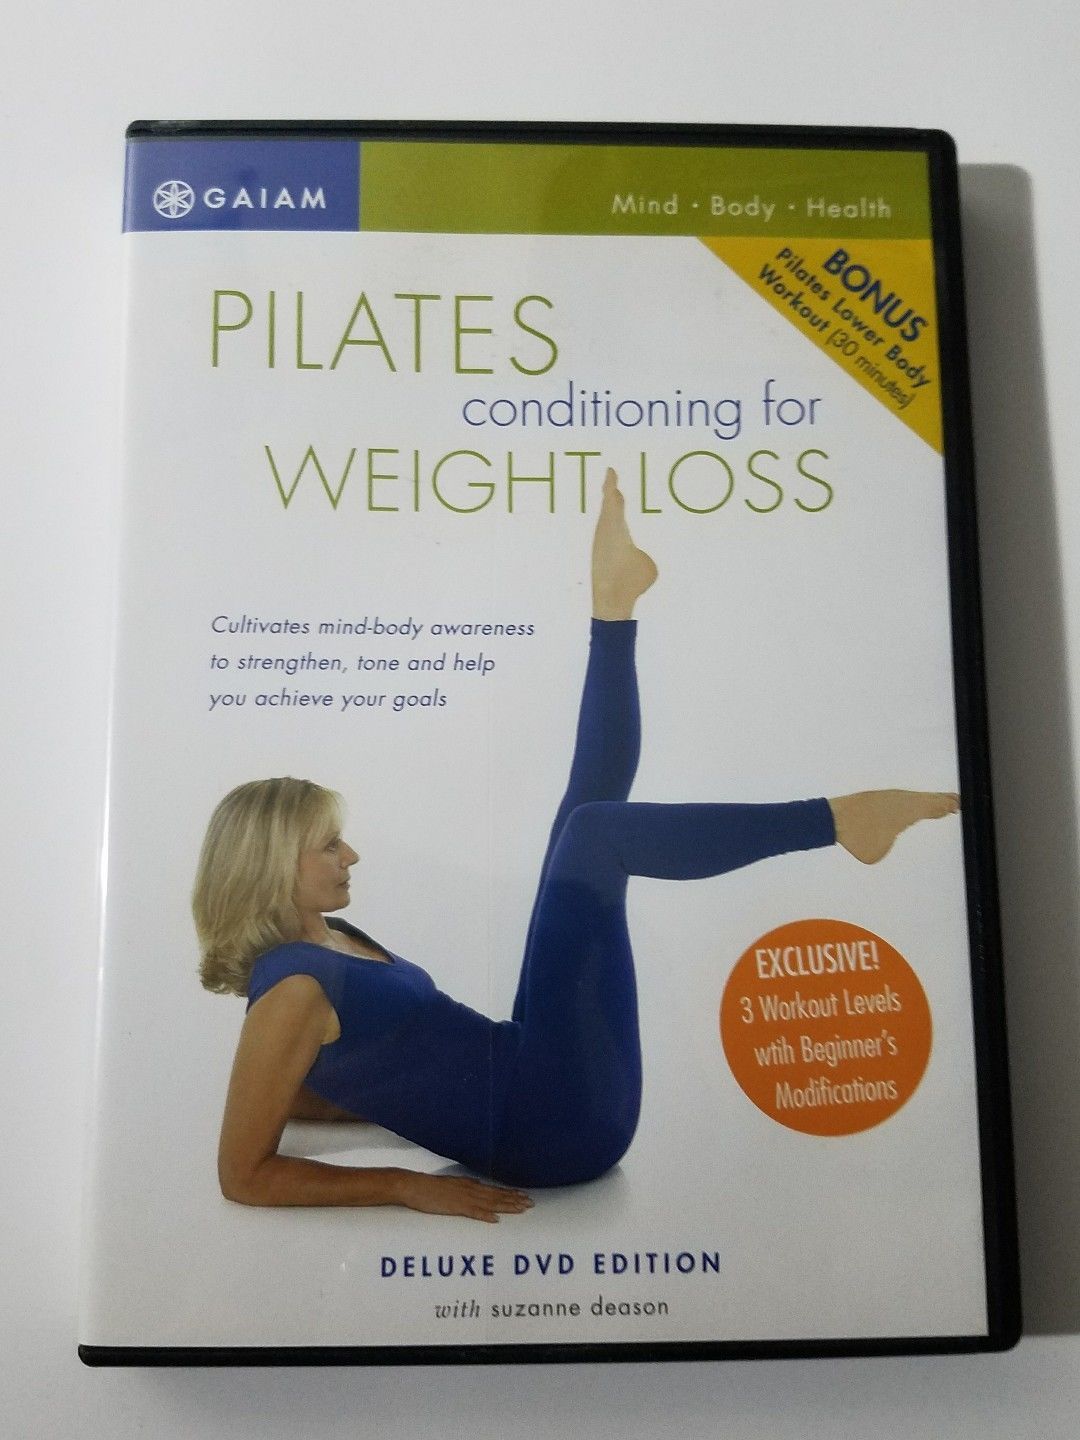 2 DVD Gaiam Pilates Conditioning for Weight Loss Deluxe Edition Suzanne Deason - $8.49